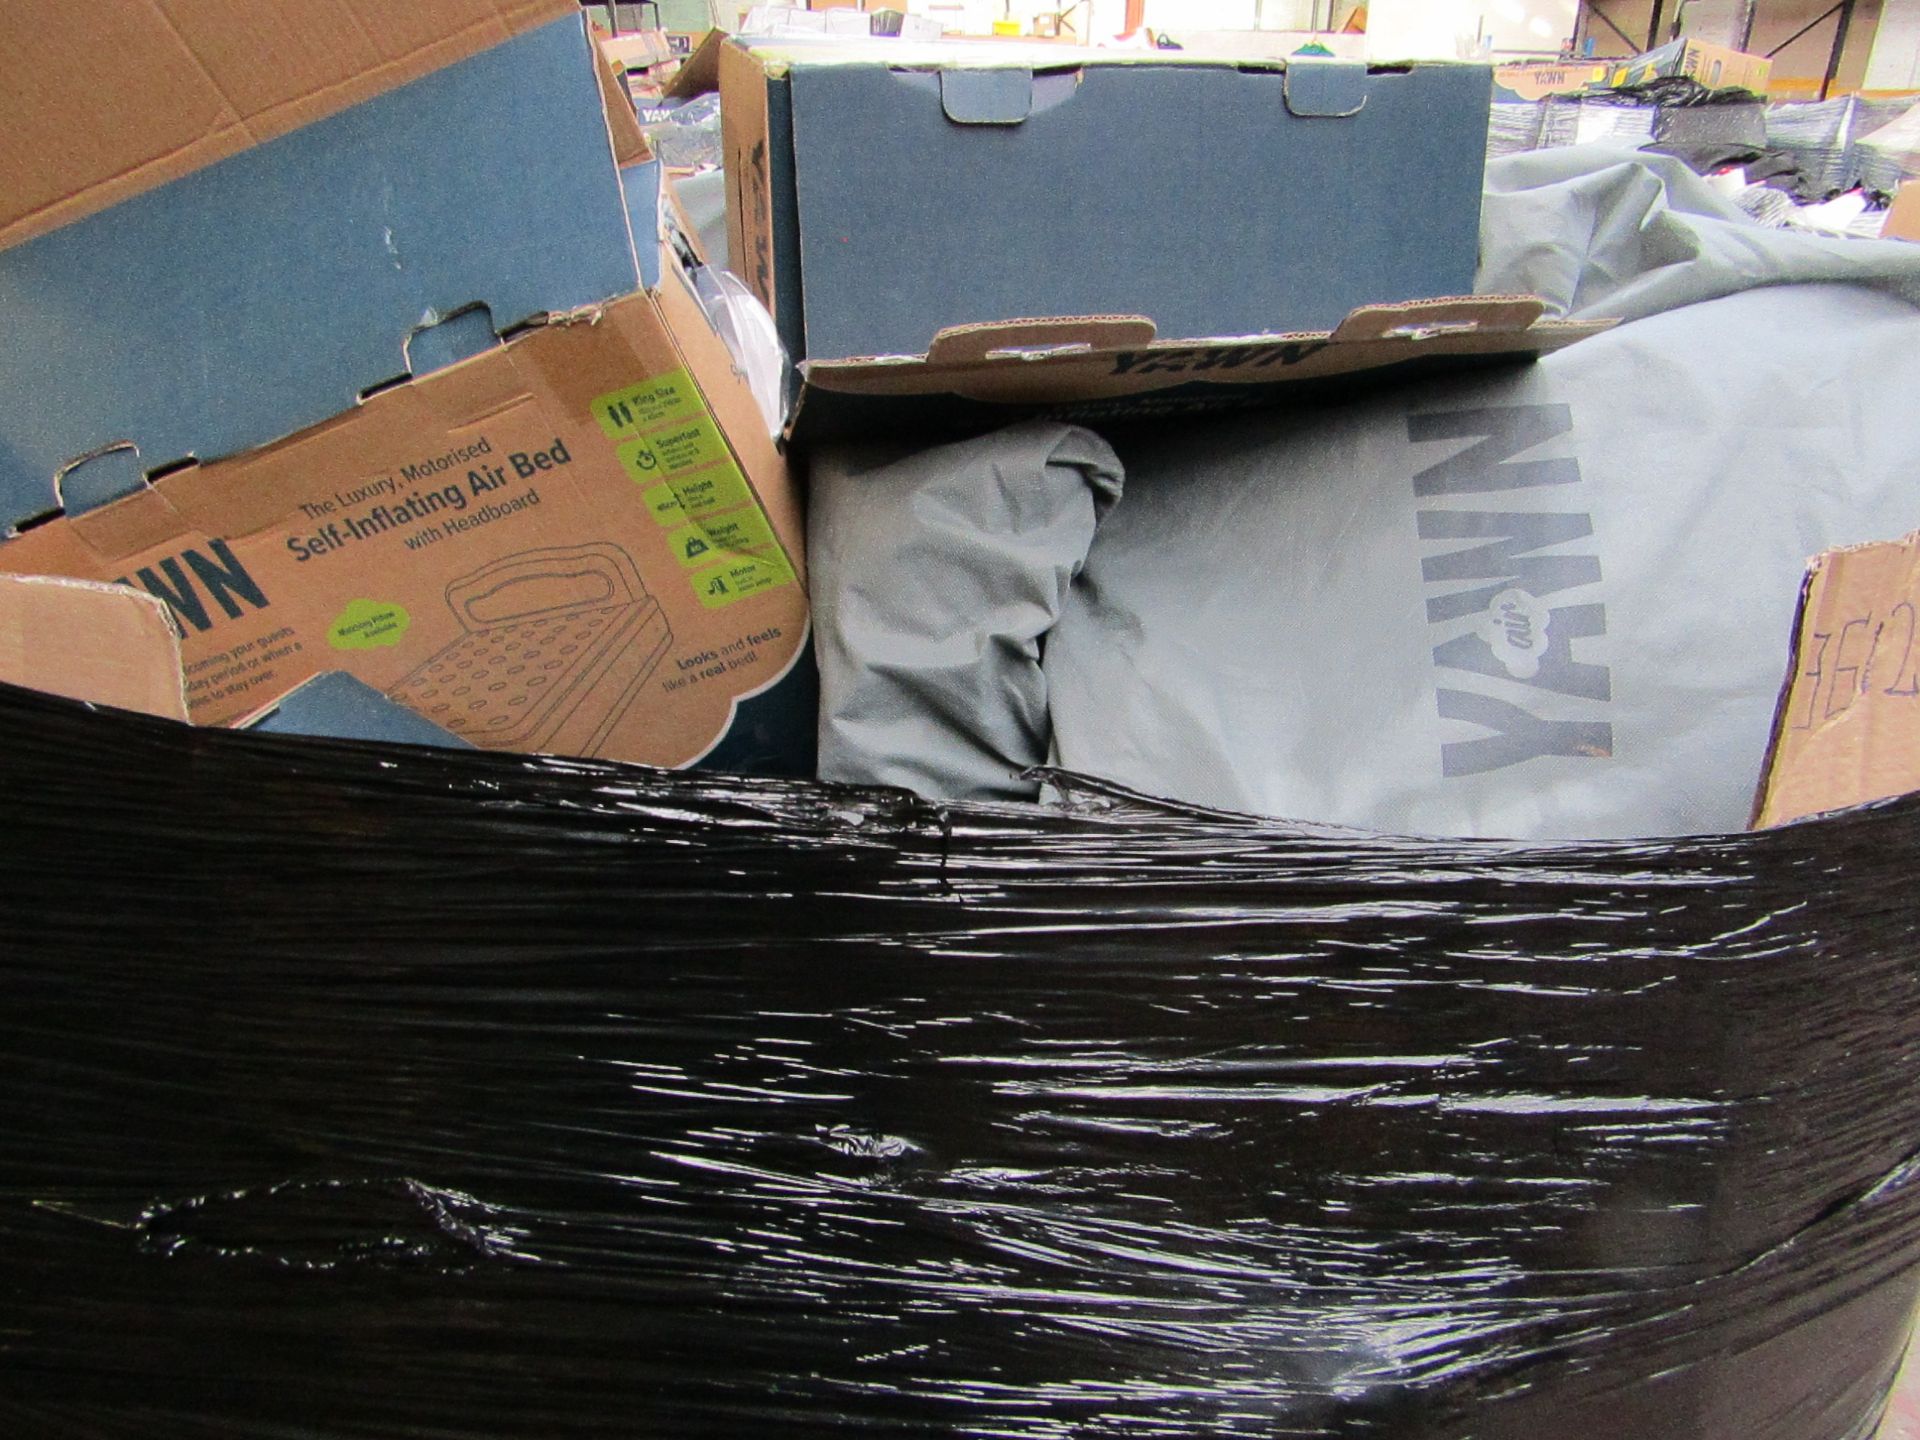 | 1X | PALLET OF APPROX 25-30 VARIOUS YAWN AIR BEDS, ALL RAW CUSTOMER RETURNS LOOSE OR NON